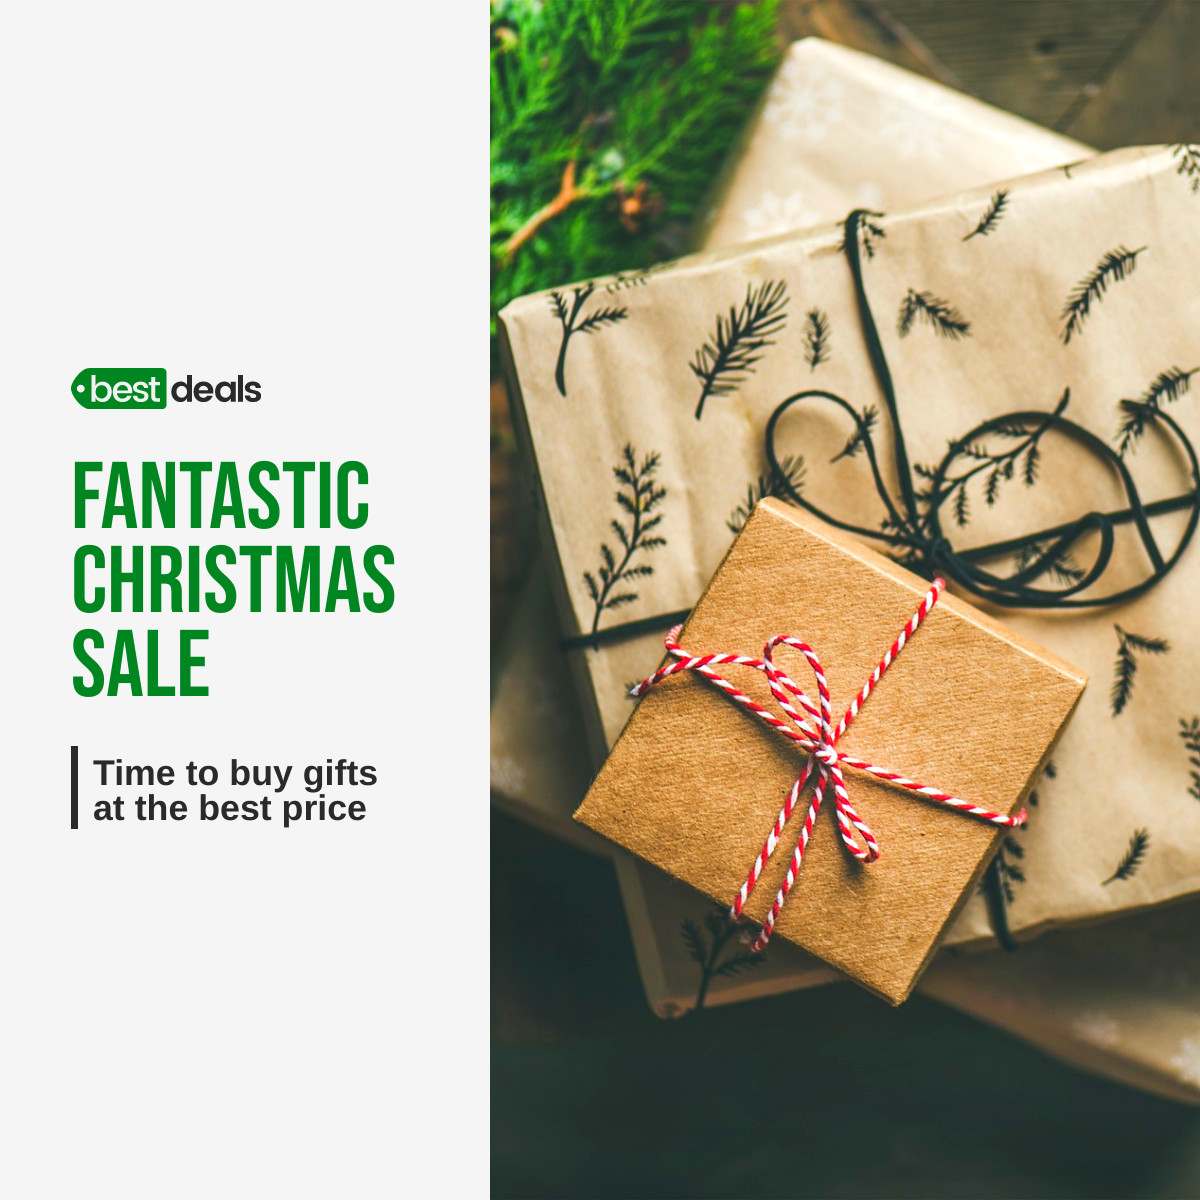 Fantastic Christmas Sale to Buy Gifts Inline Rectangle 300x250